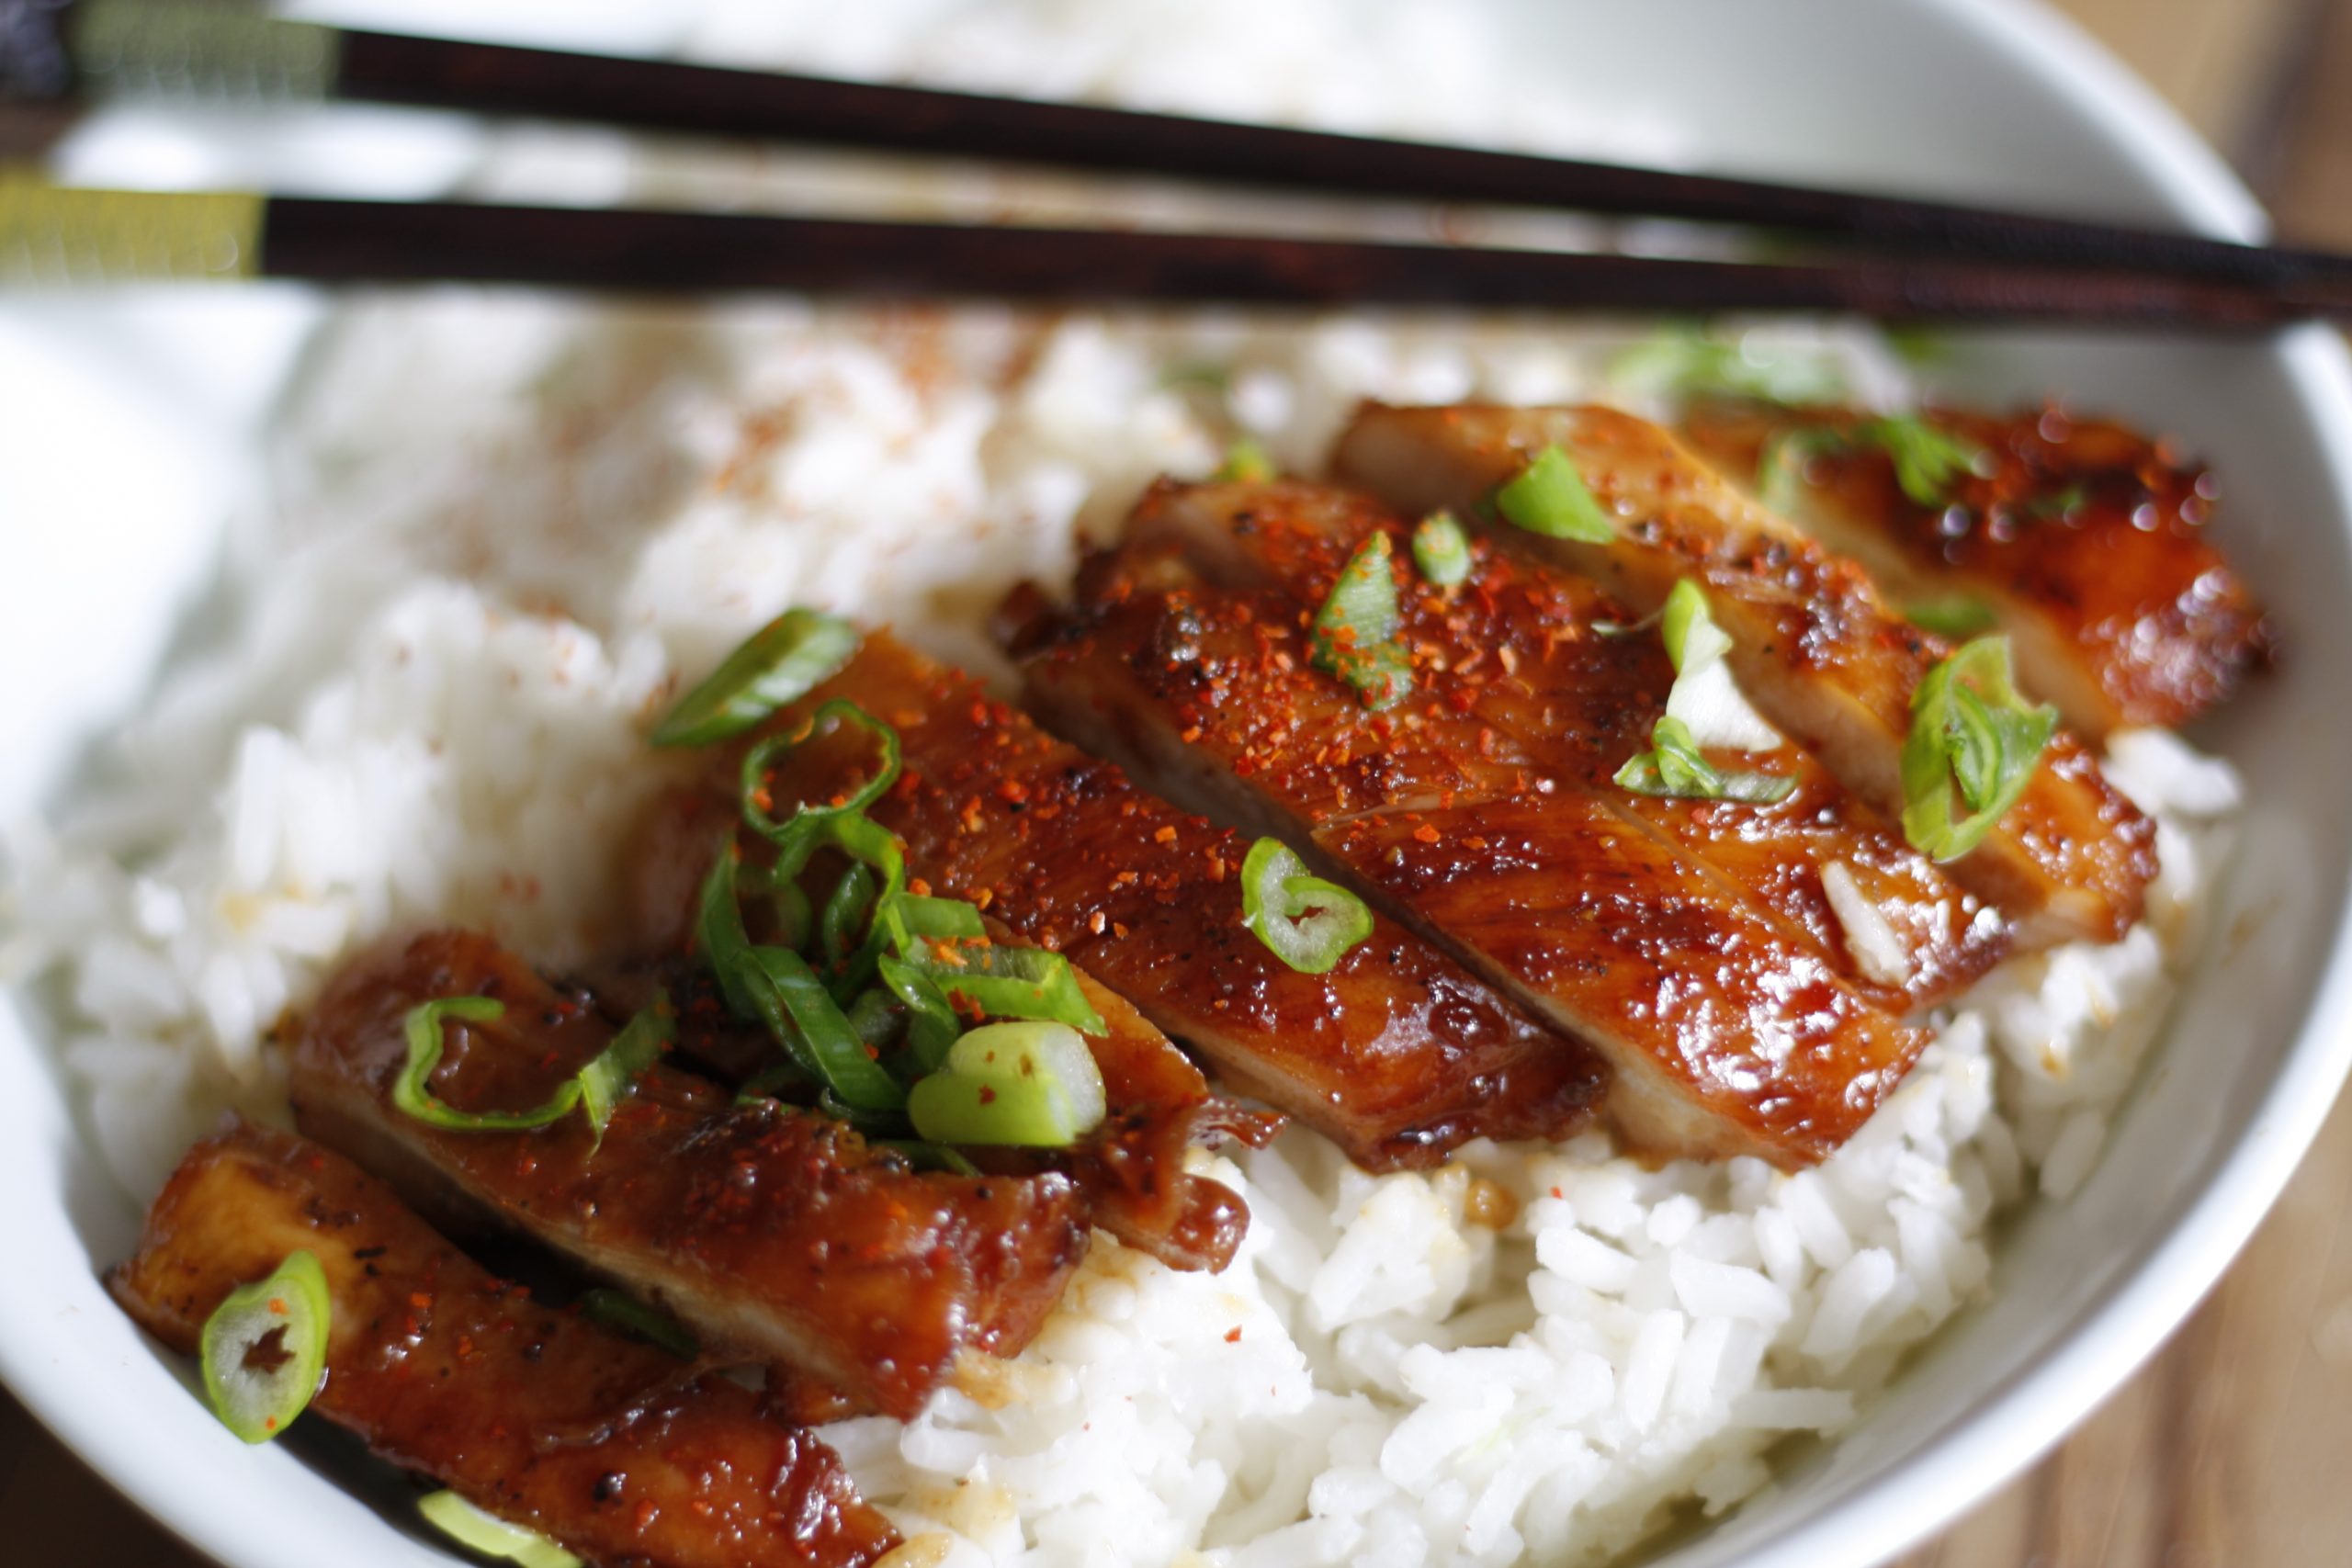 Teriyaki Chicken served with rice and garnished with green onions in a white bowl with chopsticks on top.